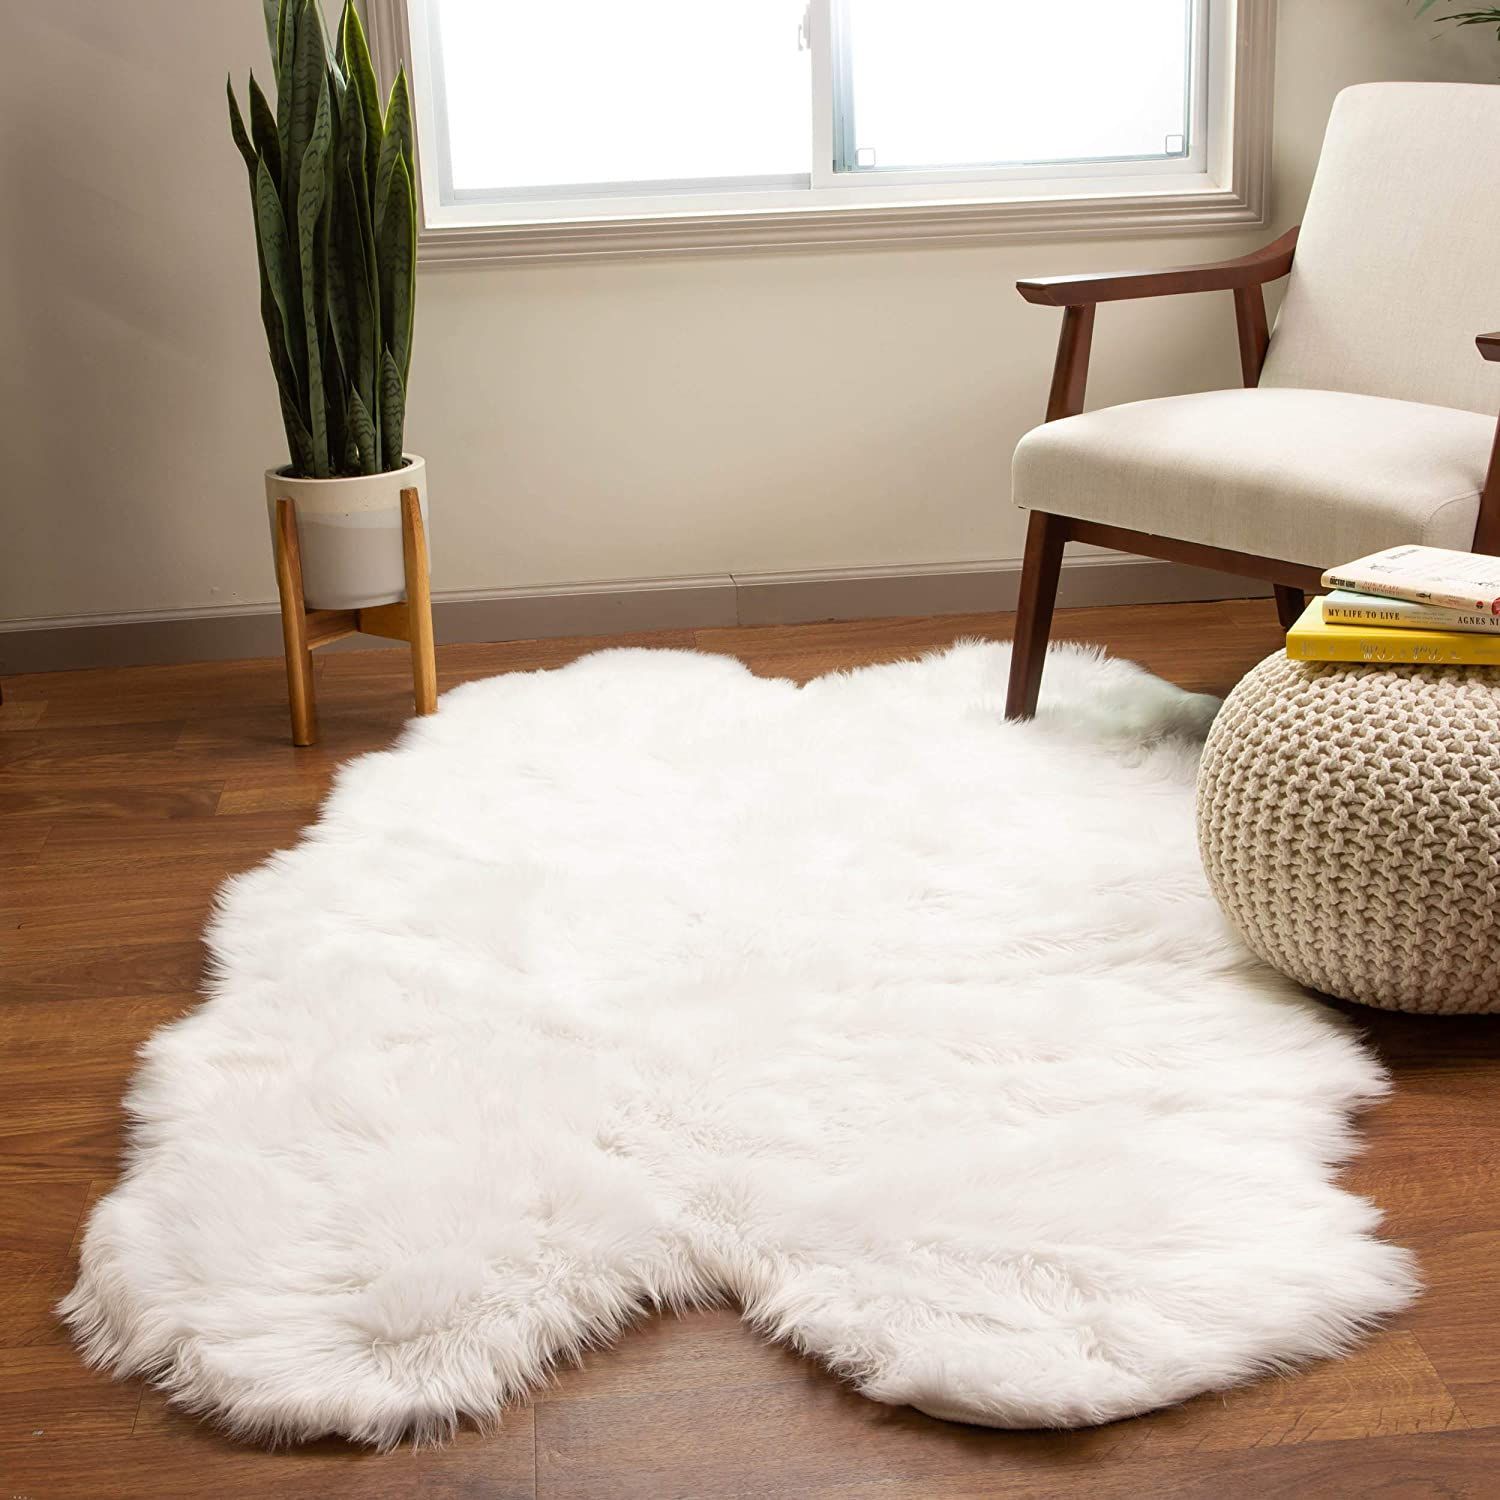 Soft Area Rugs To Make Your Home Cozy, Cool Area Rug